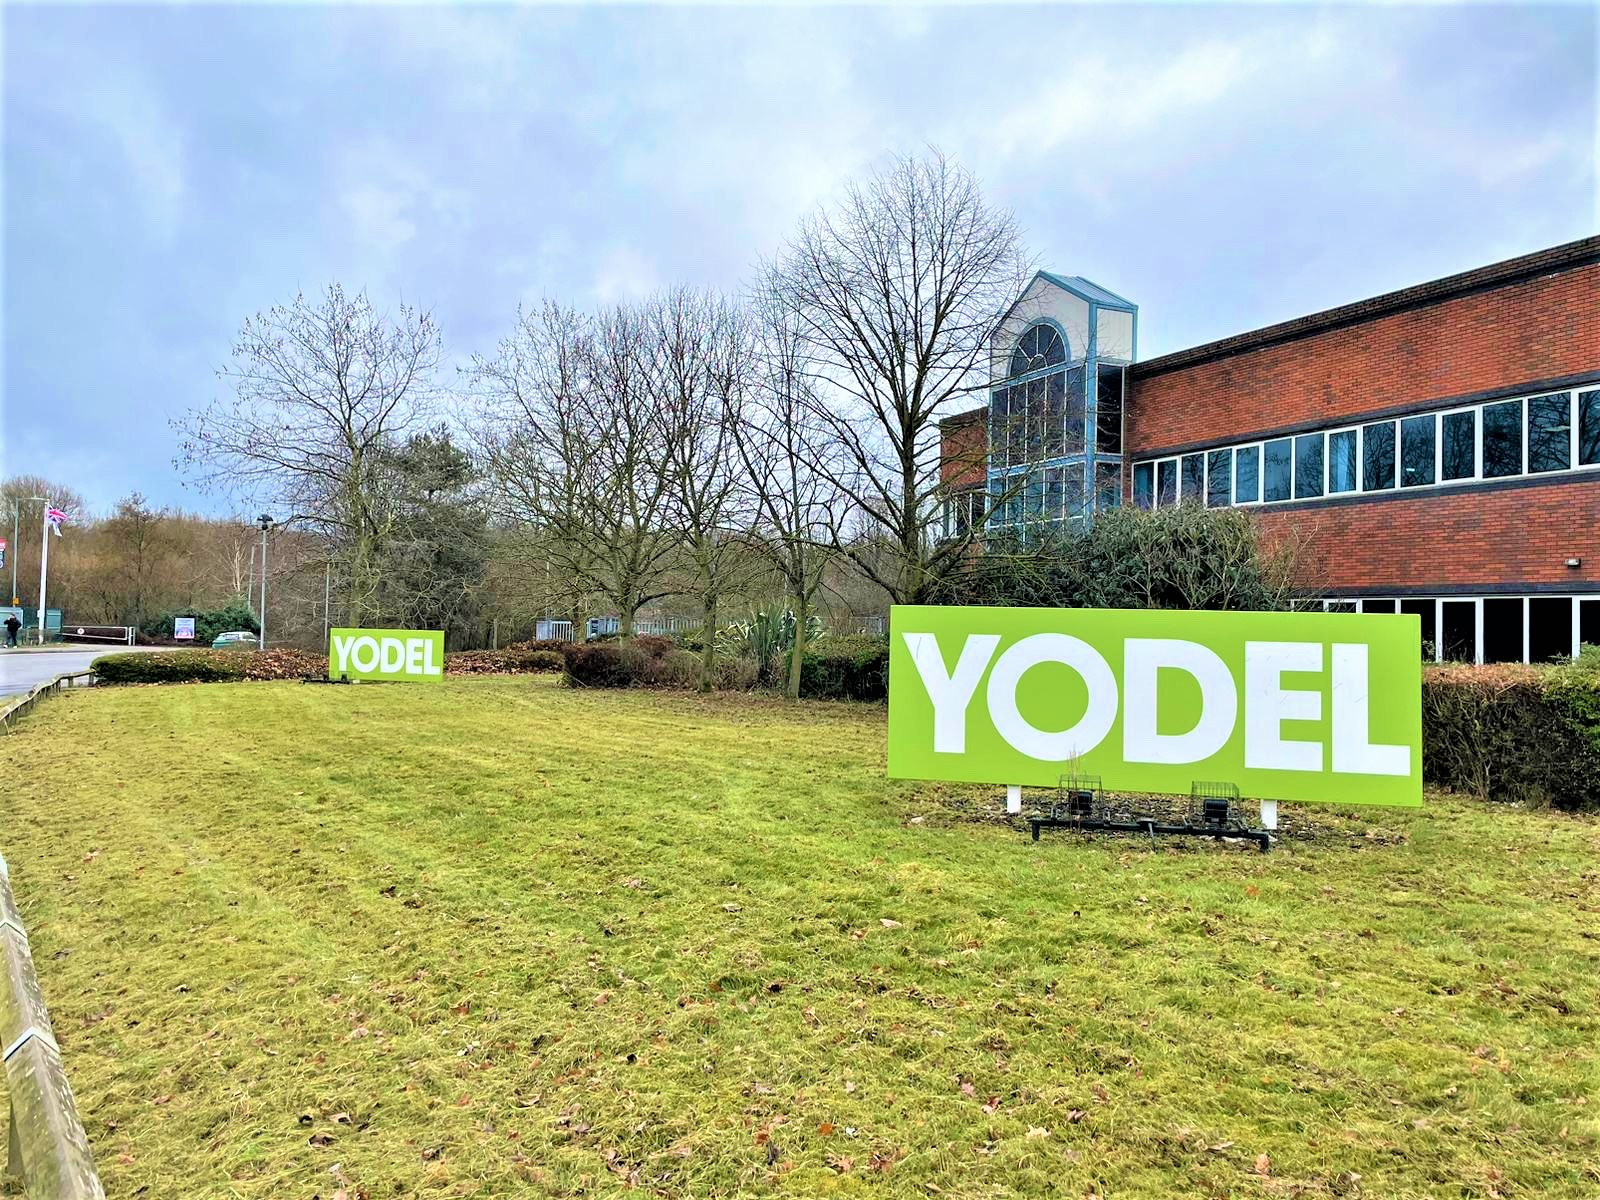 Yodel announces new Coventry depot following growth period